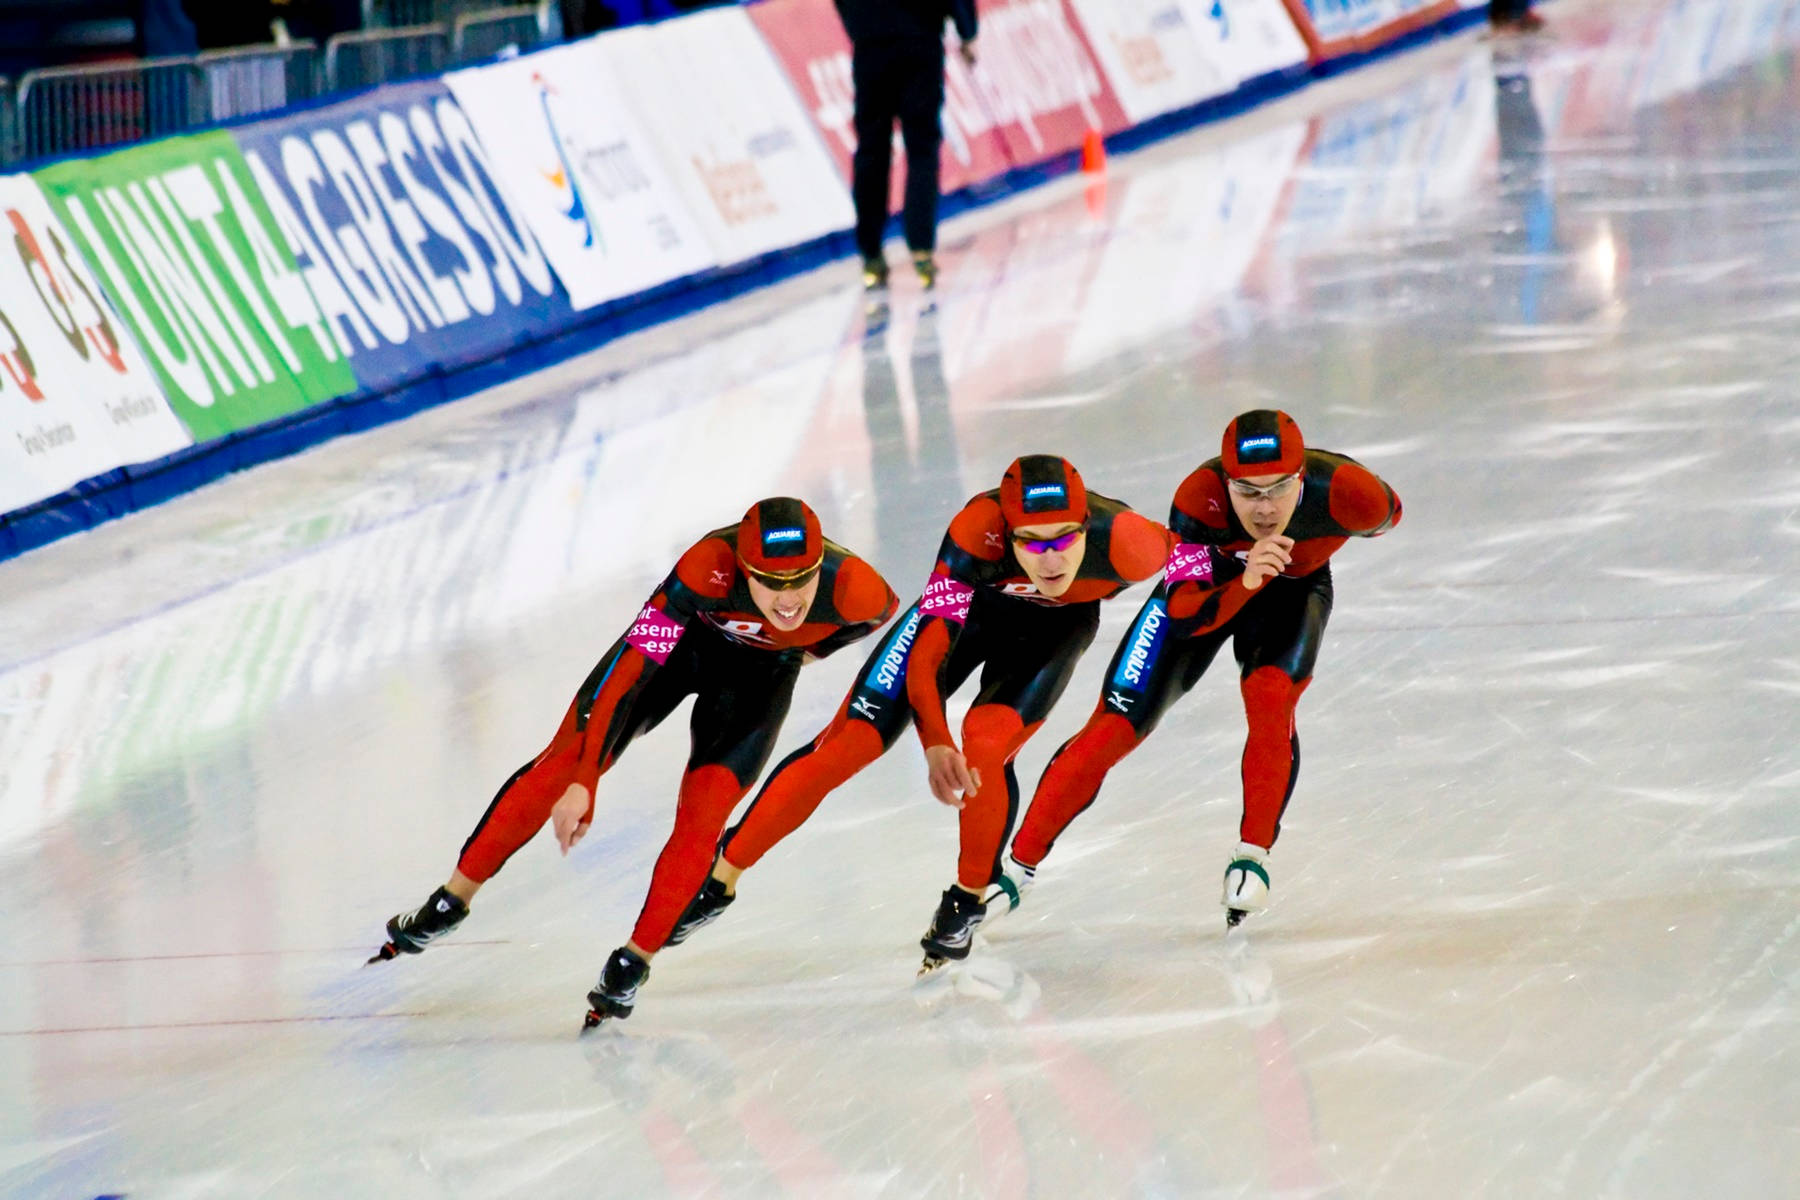 Dynamic Champion Speed Skaters in Action Wallpaper